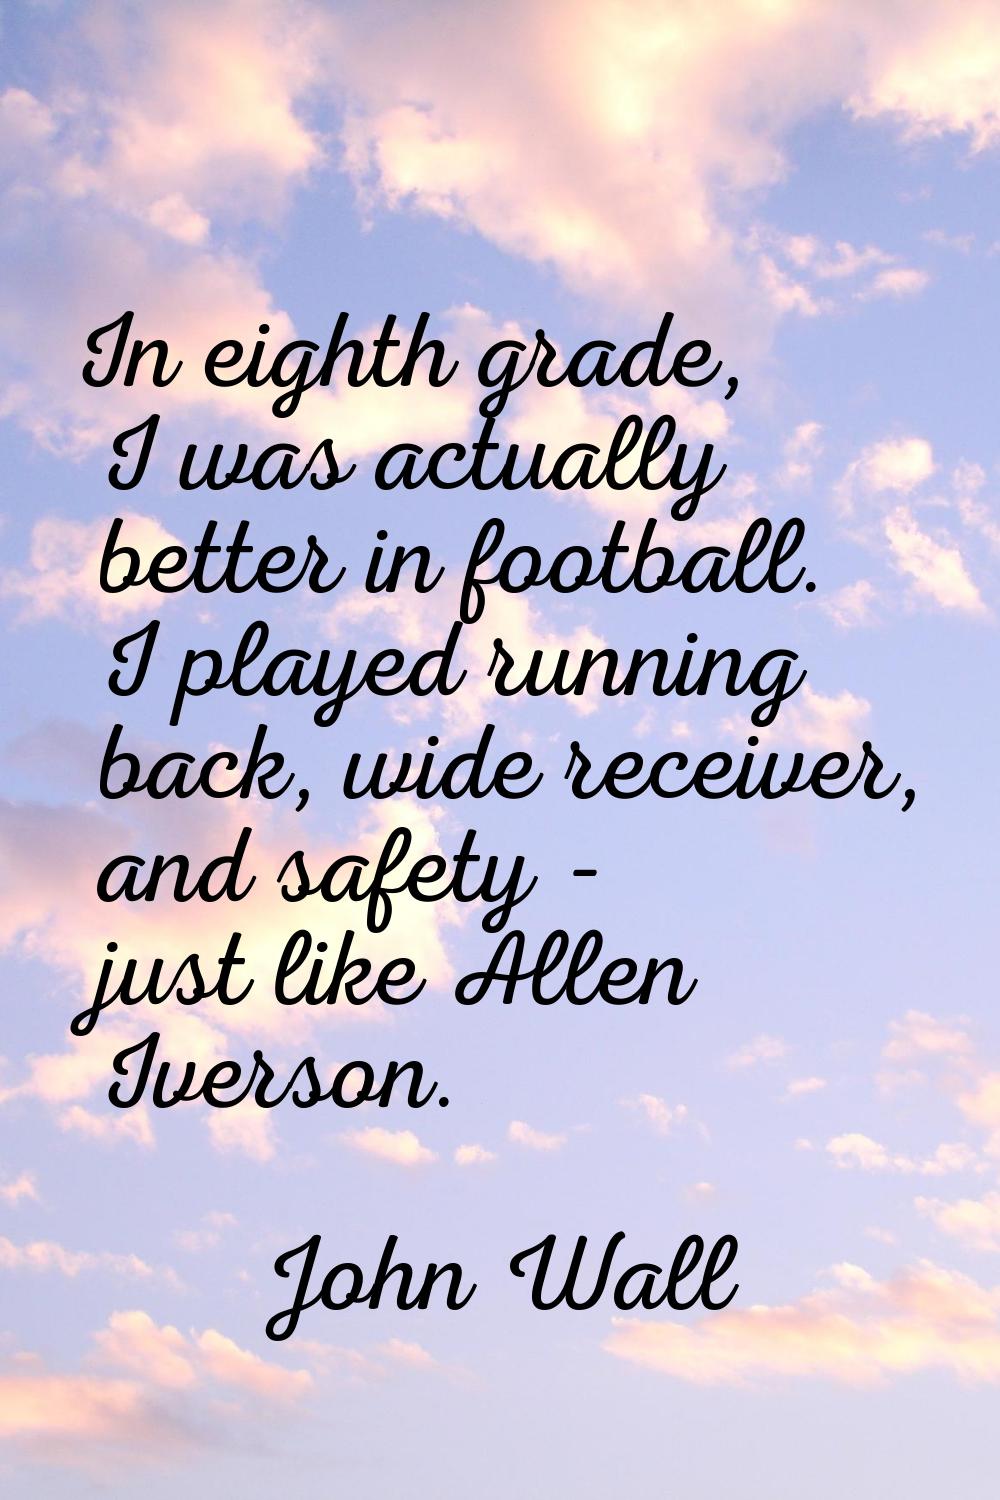 In eighth grade, I was actually better in football. I played running back, wide receiver, and safet